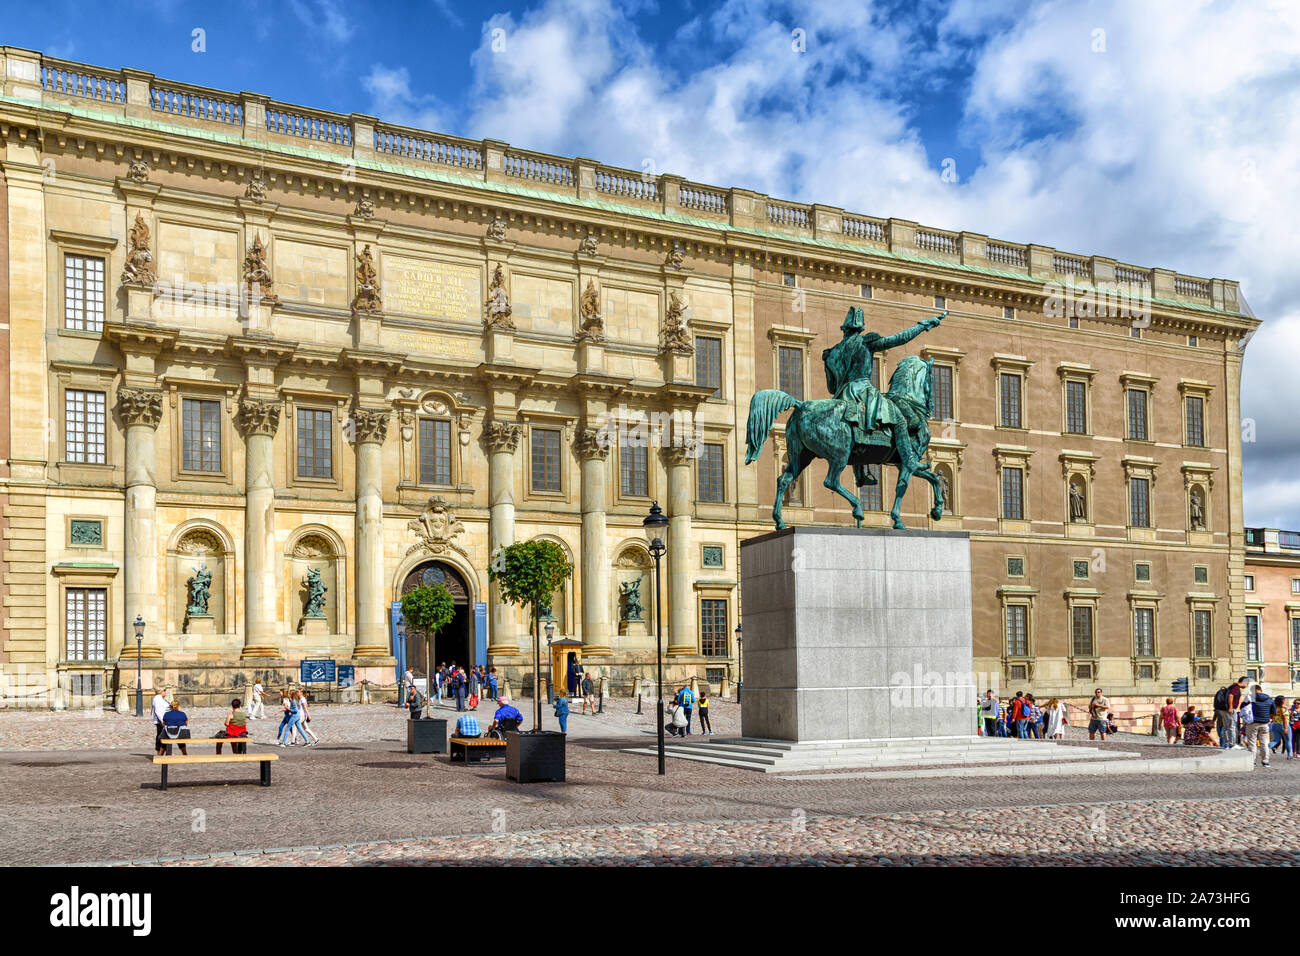 Stockholm, Sweden - August 09, 2019: Tourist visiting Royal Palace and the equestrian statue of the Swedish king Karl XIV sculpted by Johan Bengt Foge Stock Photo